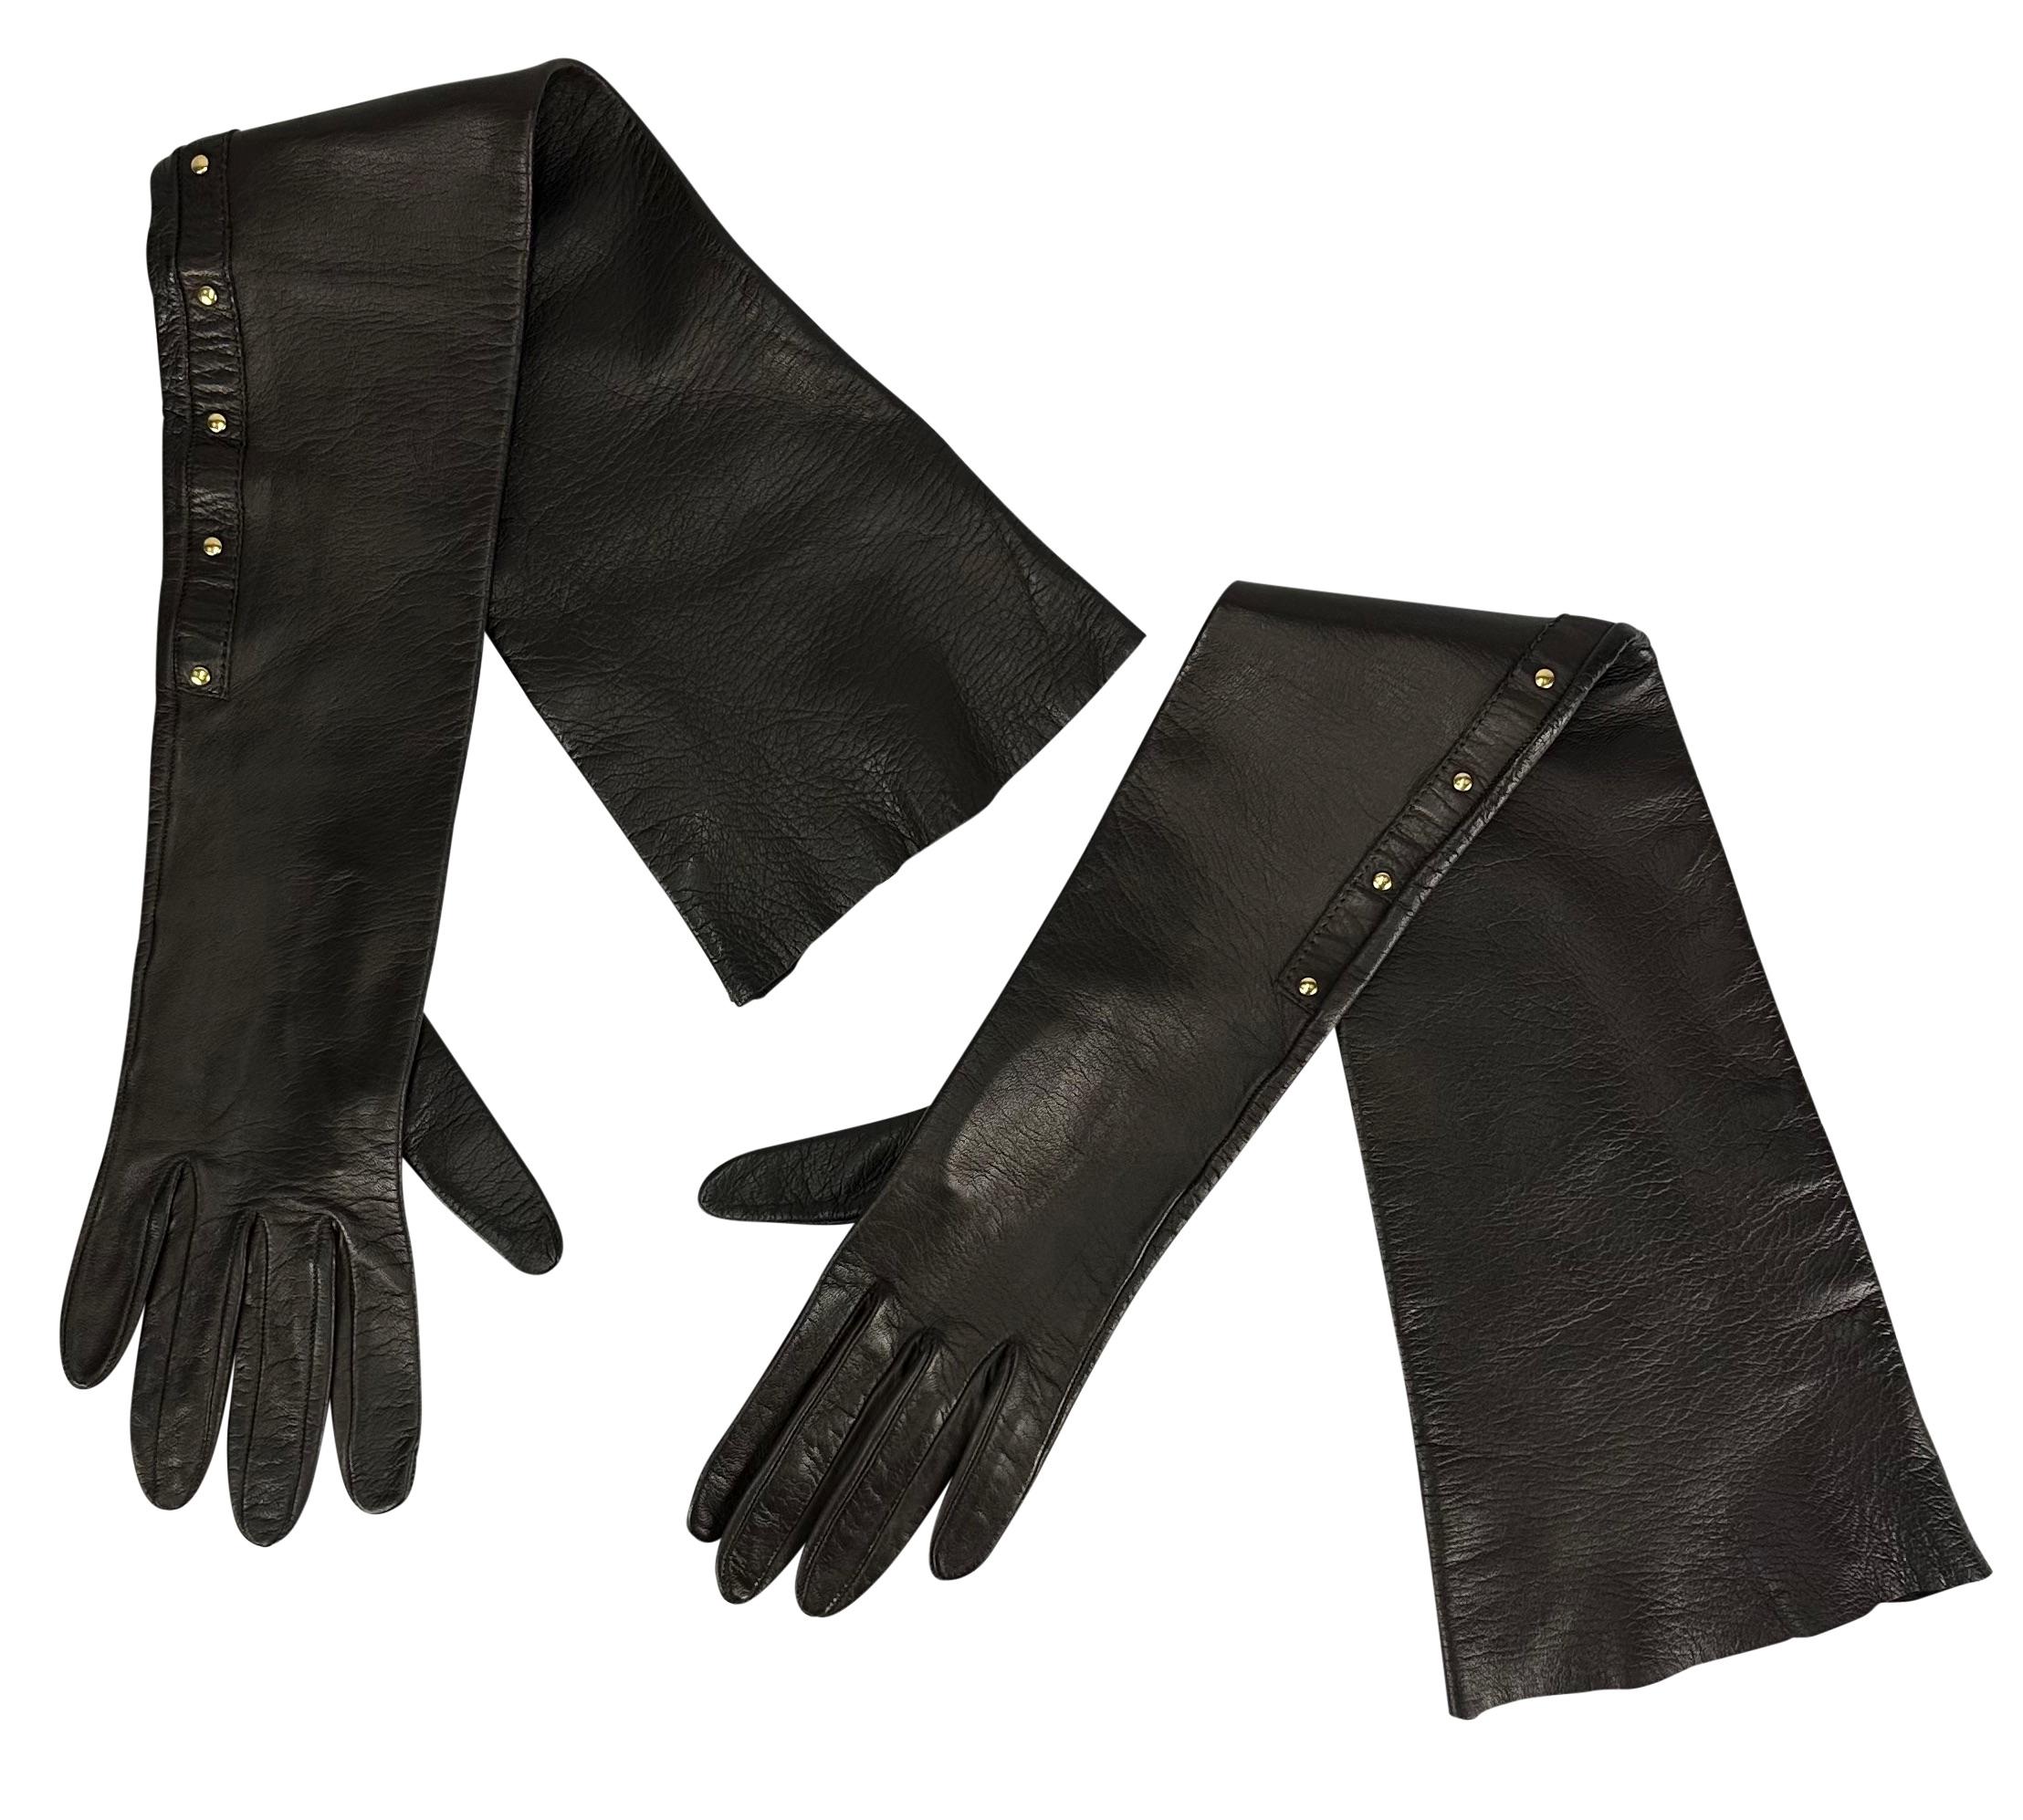 F/W 2003 Gucci by Tom Ford Runway Ad Studded Black Leather Gloves In Excellent Condition For Sale In West Hollywood, CA